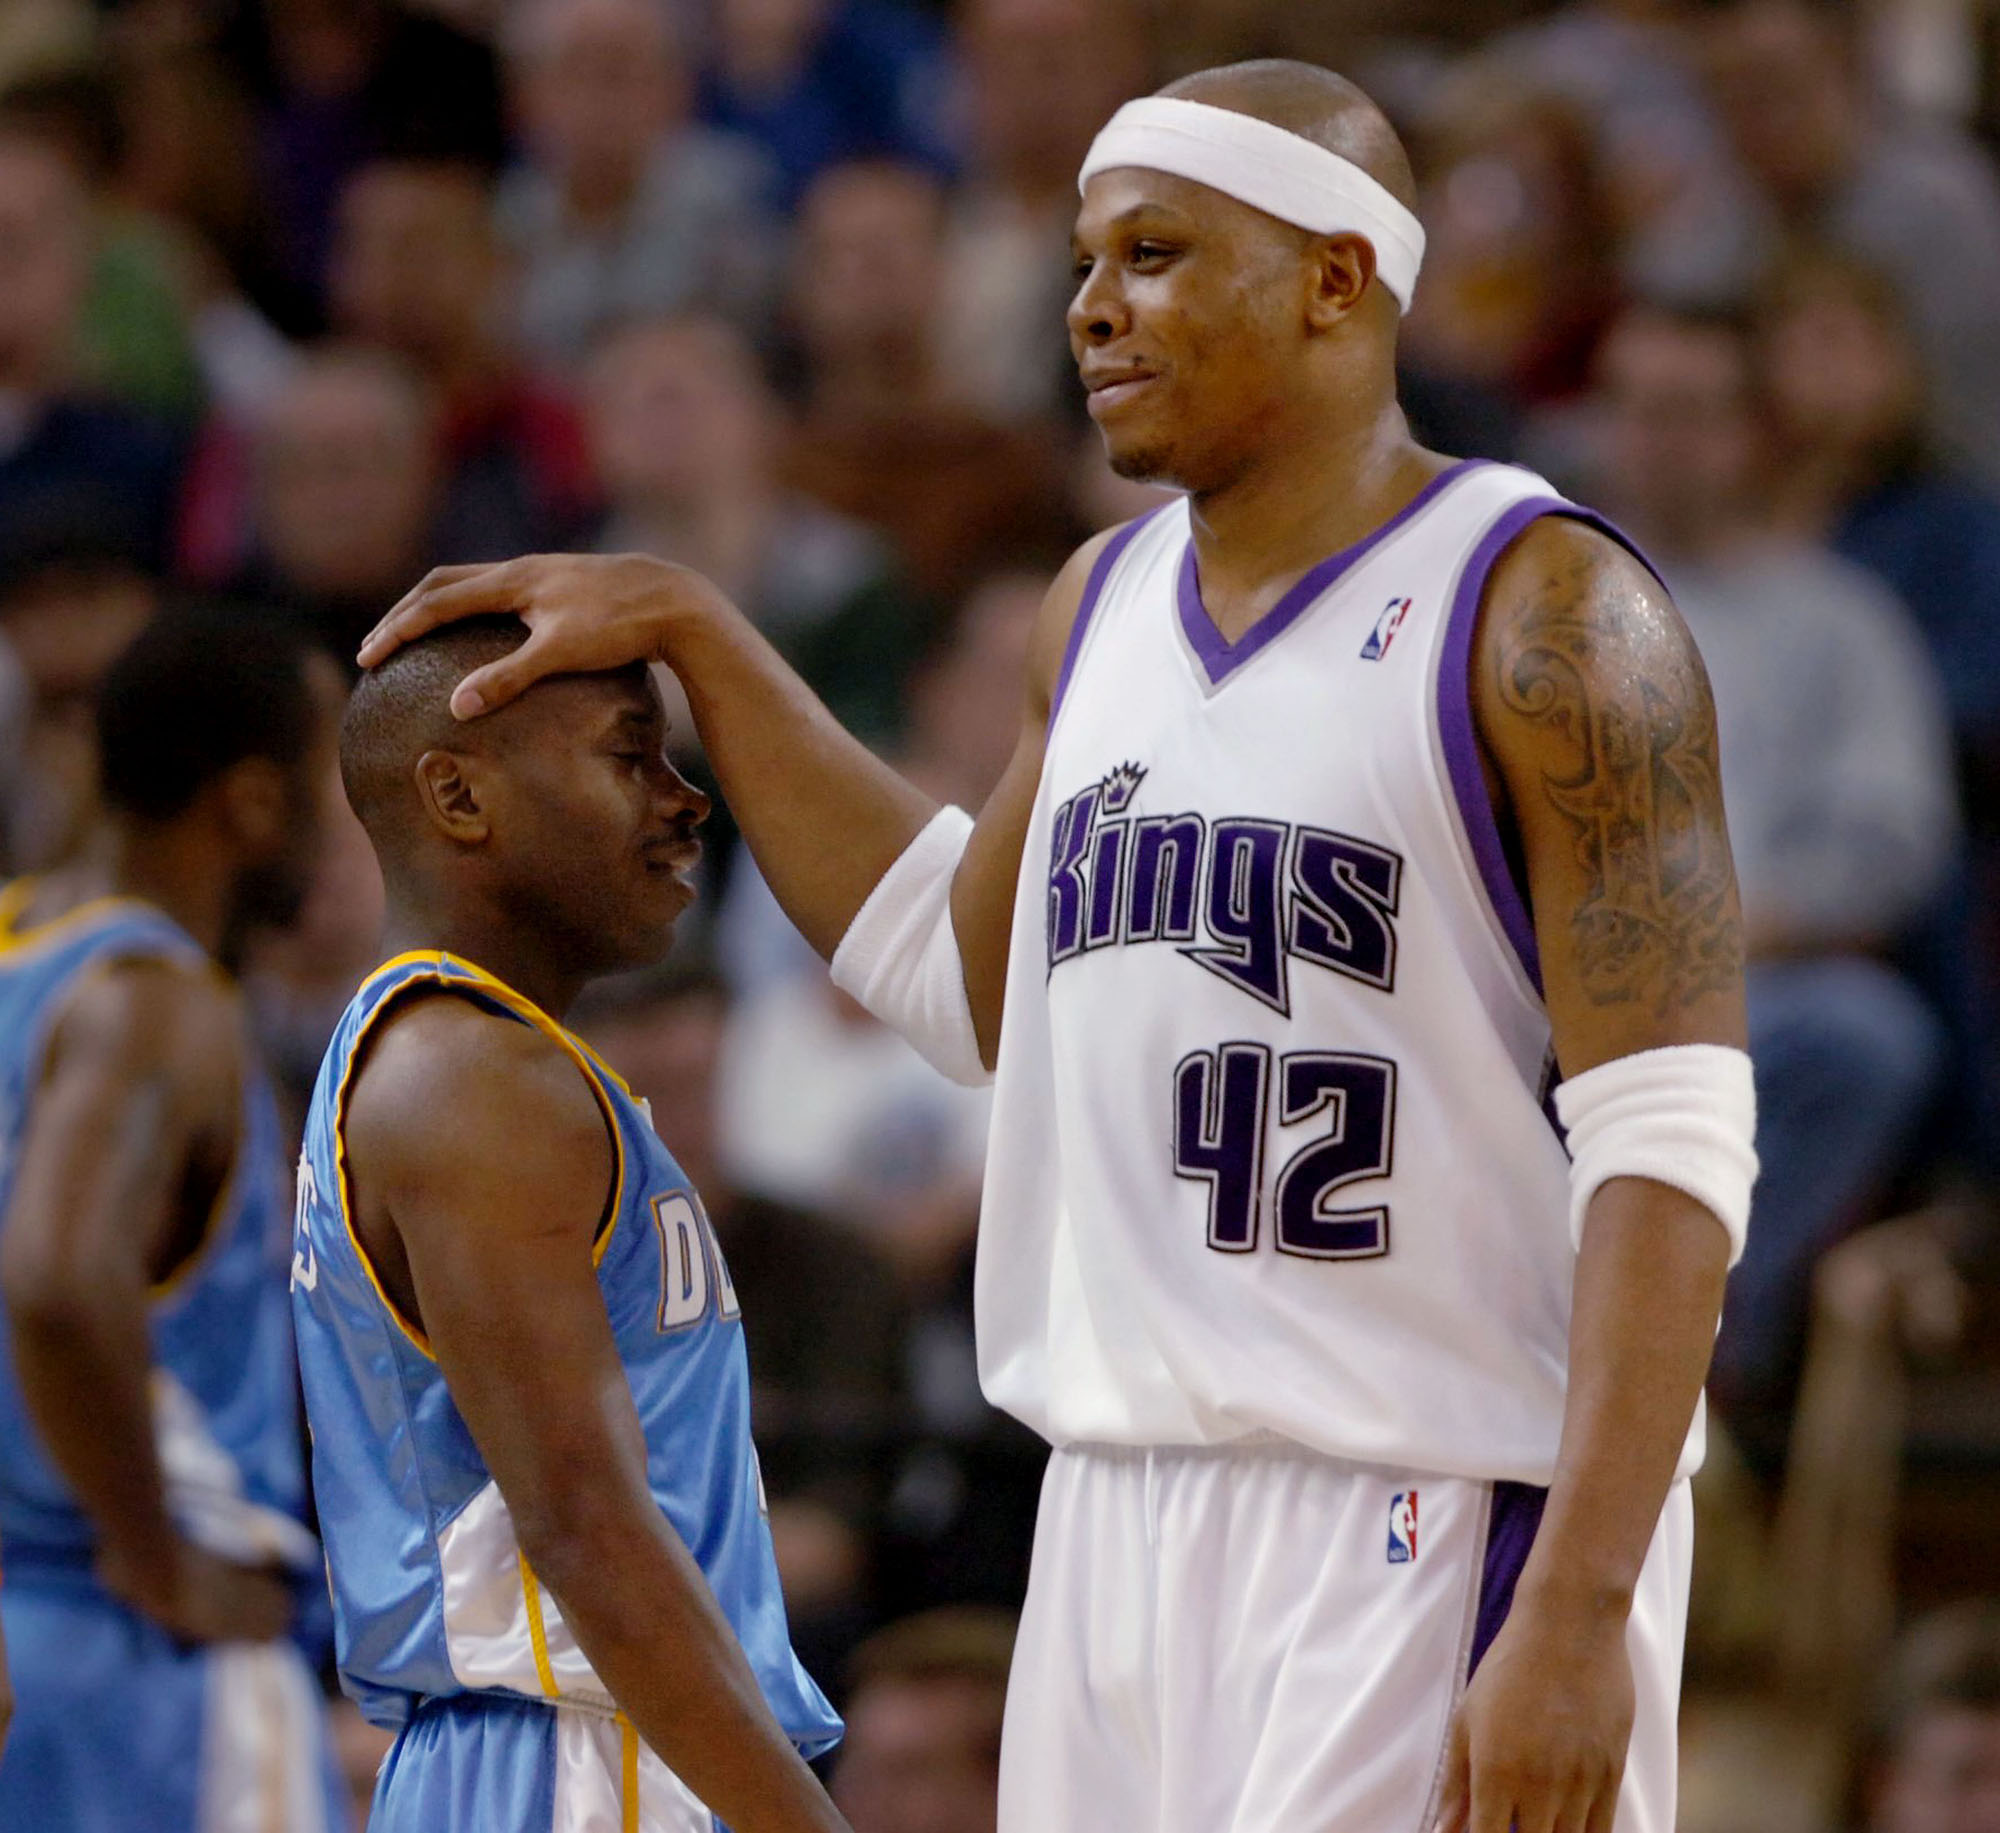  6' 5" Sacramento King Bonzi Wells responds in fun to the scrappy play of Denver Nuggets 5' 5" Earl Boykins after Boykins was whistled for a foul in the 2nd half of the game. 